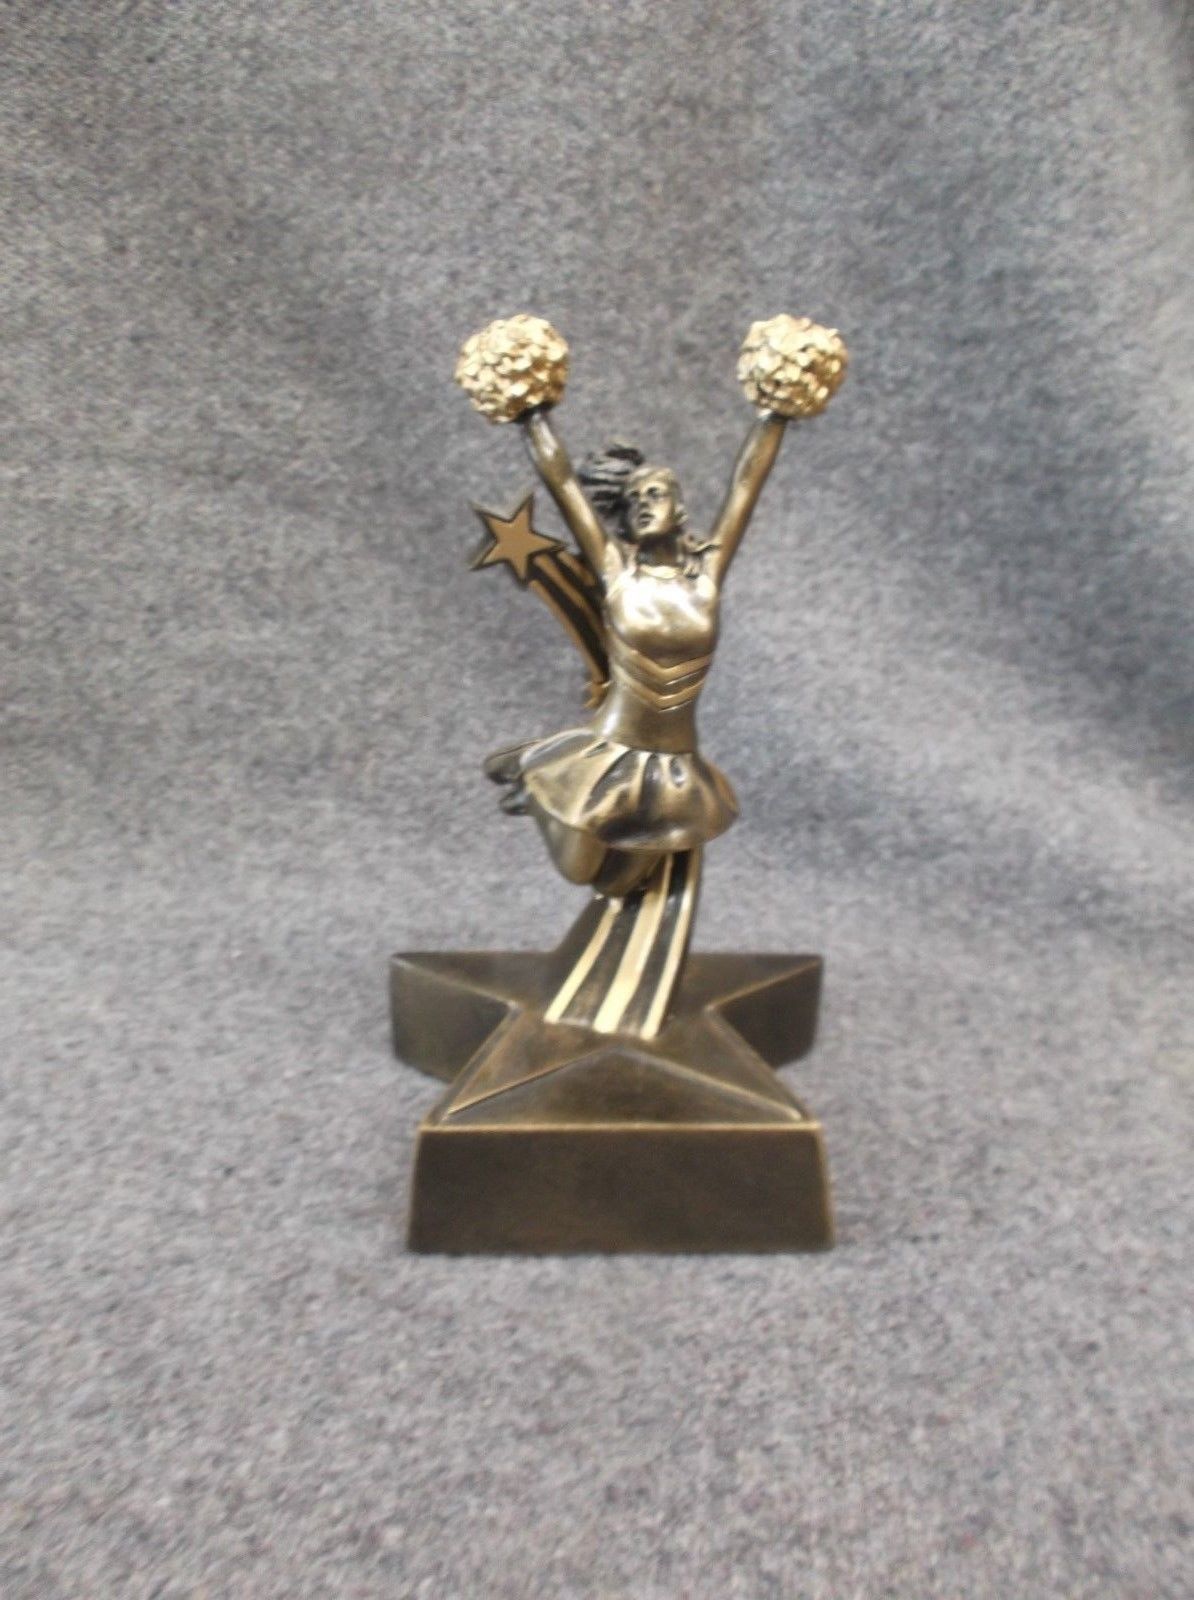 RST306 CHEERLEADING statue trophy resin gold star base small - Cheerleading